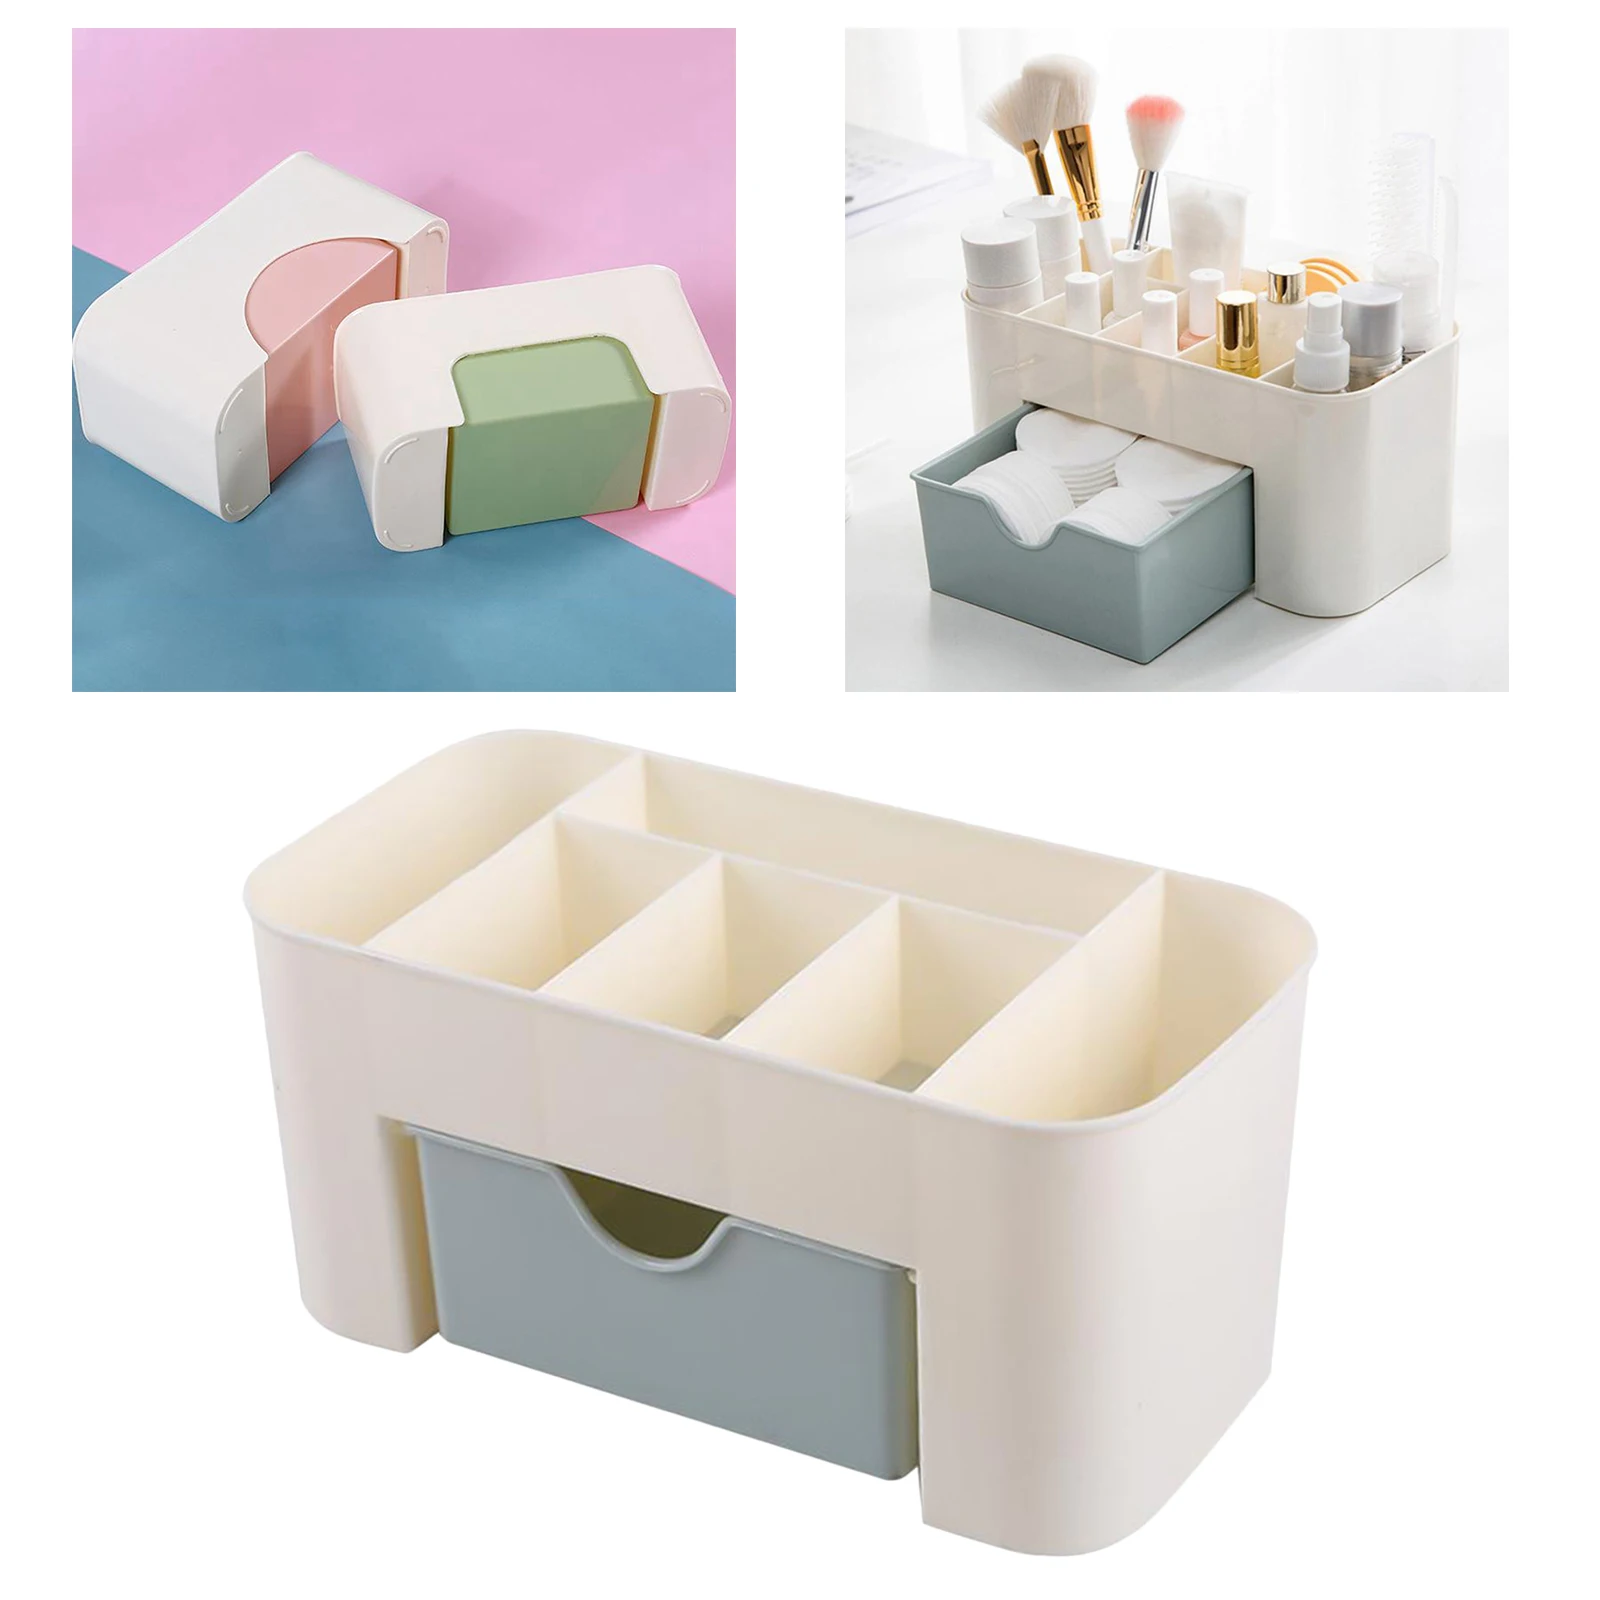 Plastic Cosmetic Makeup Accessories Organiser with Drawer Makeup Jewelry Display Box